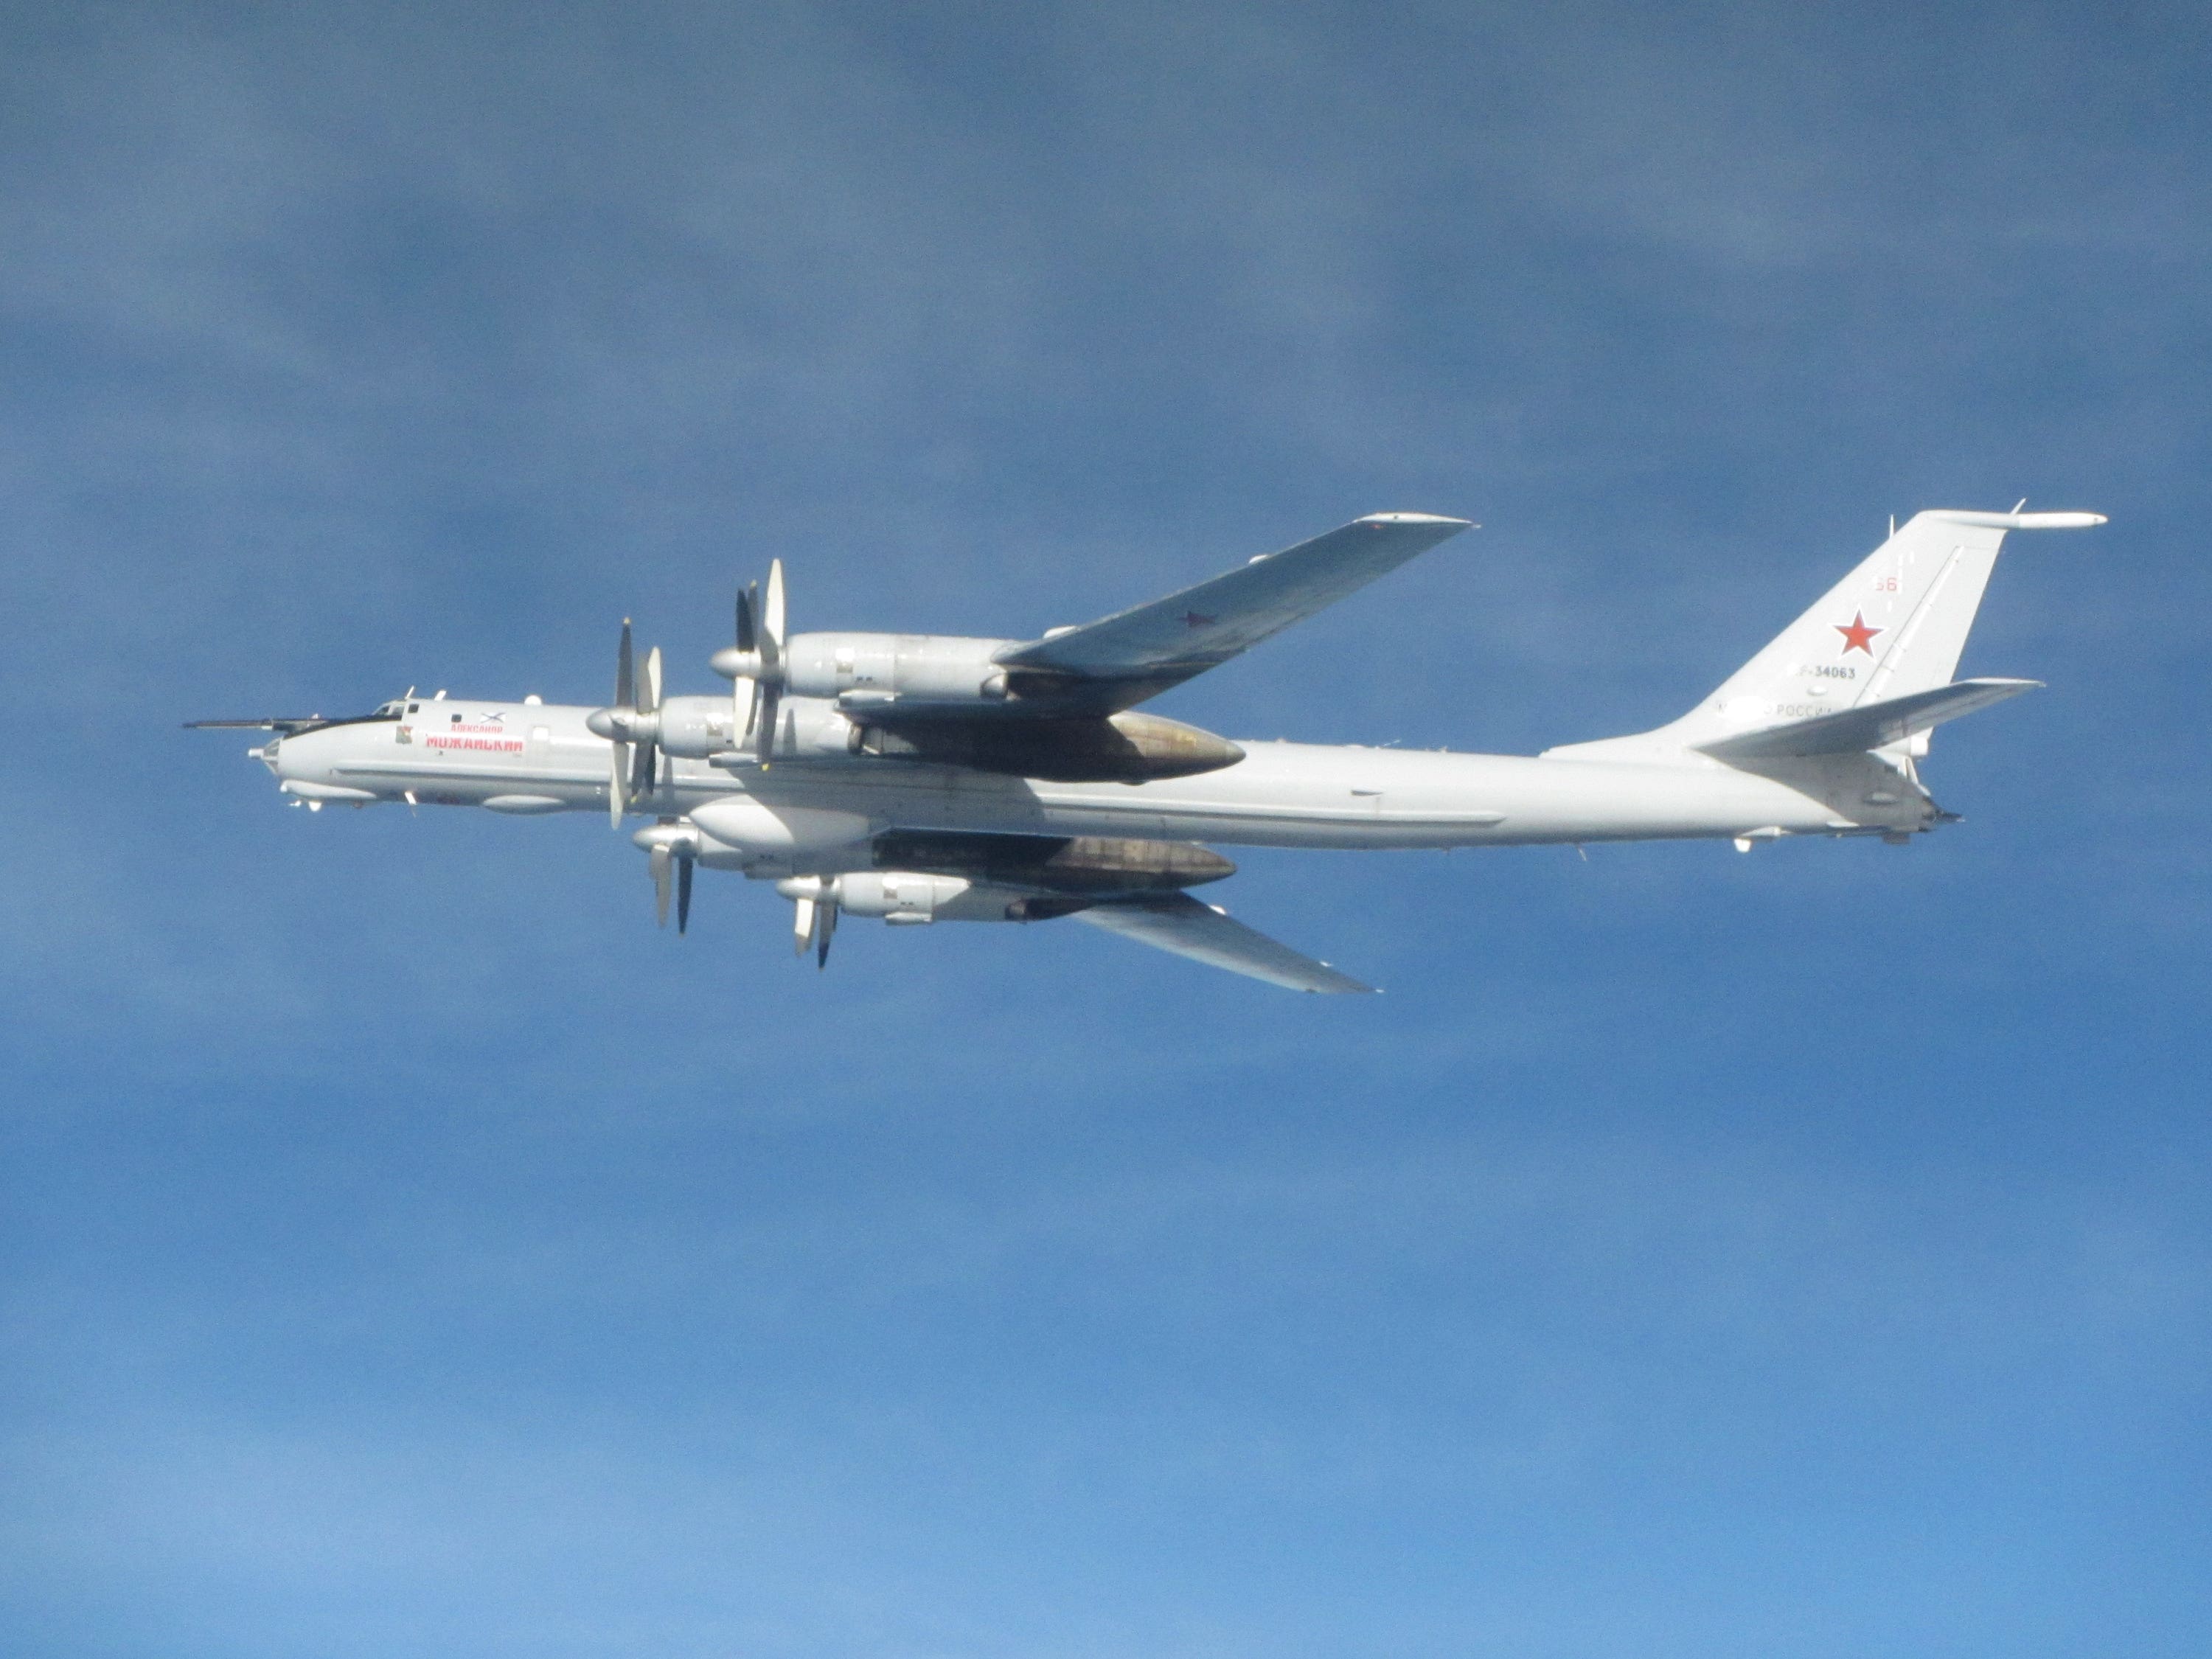 <em>The Russian Bear Aircraft was intercepted by Nato (RAF/PA)</em>”/><cite class=cite></cite></div><figcaption aria-hidden=true><em>The Russian Bear Aircraft was intercepted by Nato (RAF/PA)</em> <cite class=hidden></cite></figcaption></figure><p>One of the Royal Air Force QRA pilots involved in Monday’s mission said: “Crews here in Scotland are on standby 24/7 to scramble against any potential threats to the UK.</p><p>“On this occasion we were informed by our Nato colleagues of two suspected Russian aircraft approaching our area of interest.</p><p>“We were scrambled and intercepted two Russian Tu-142 Bear-F operating near the UK, remaining on task to dissuade them from operating in the area.</p><p>“We are committed to maintaining the integrity of UK and Nato airspace, every minute of every day.”</p><div class=